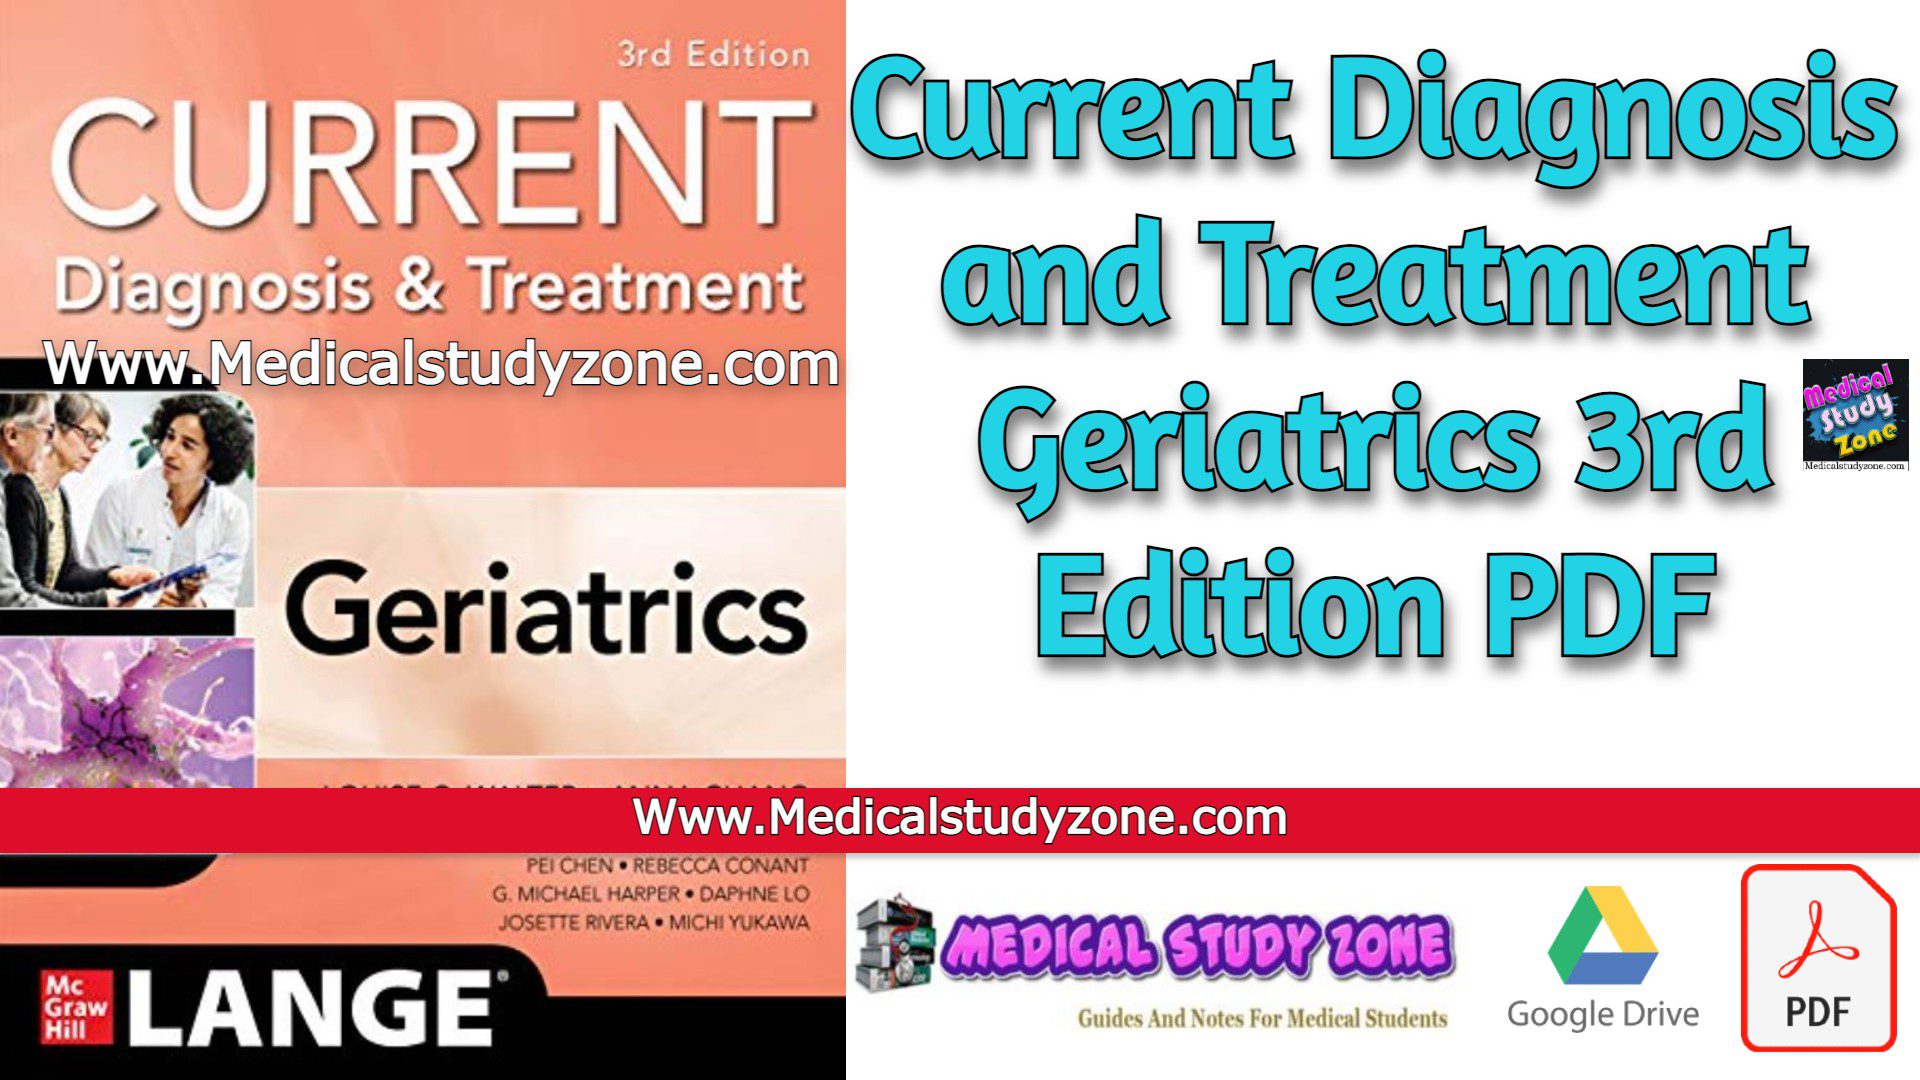 Current Diagnosis and Treatment Geriatrics 3rd Edition PDF Free Download